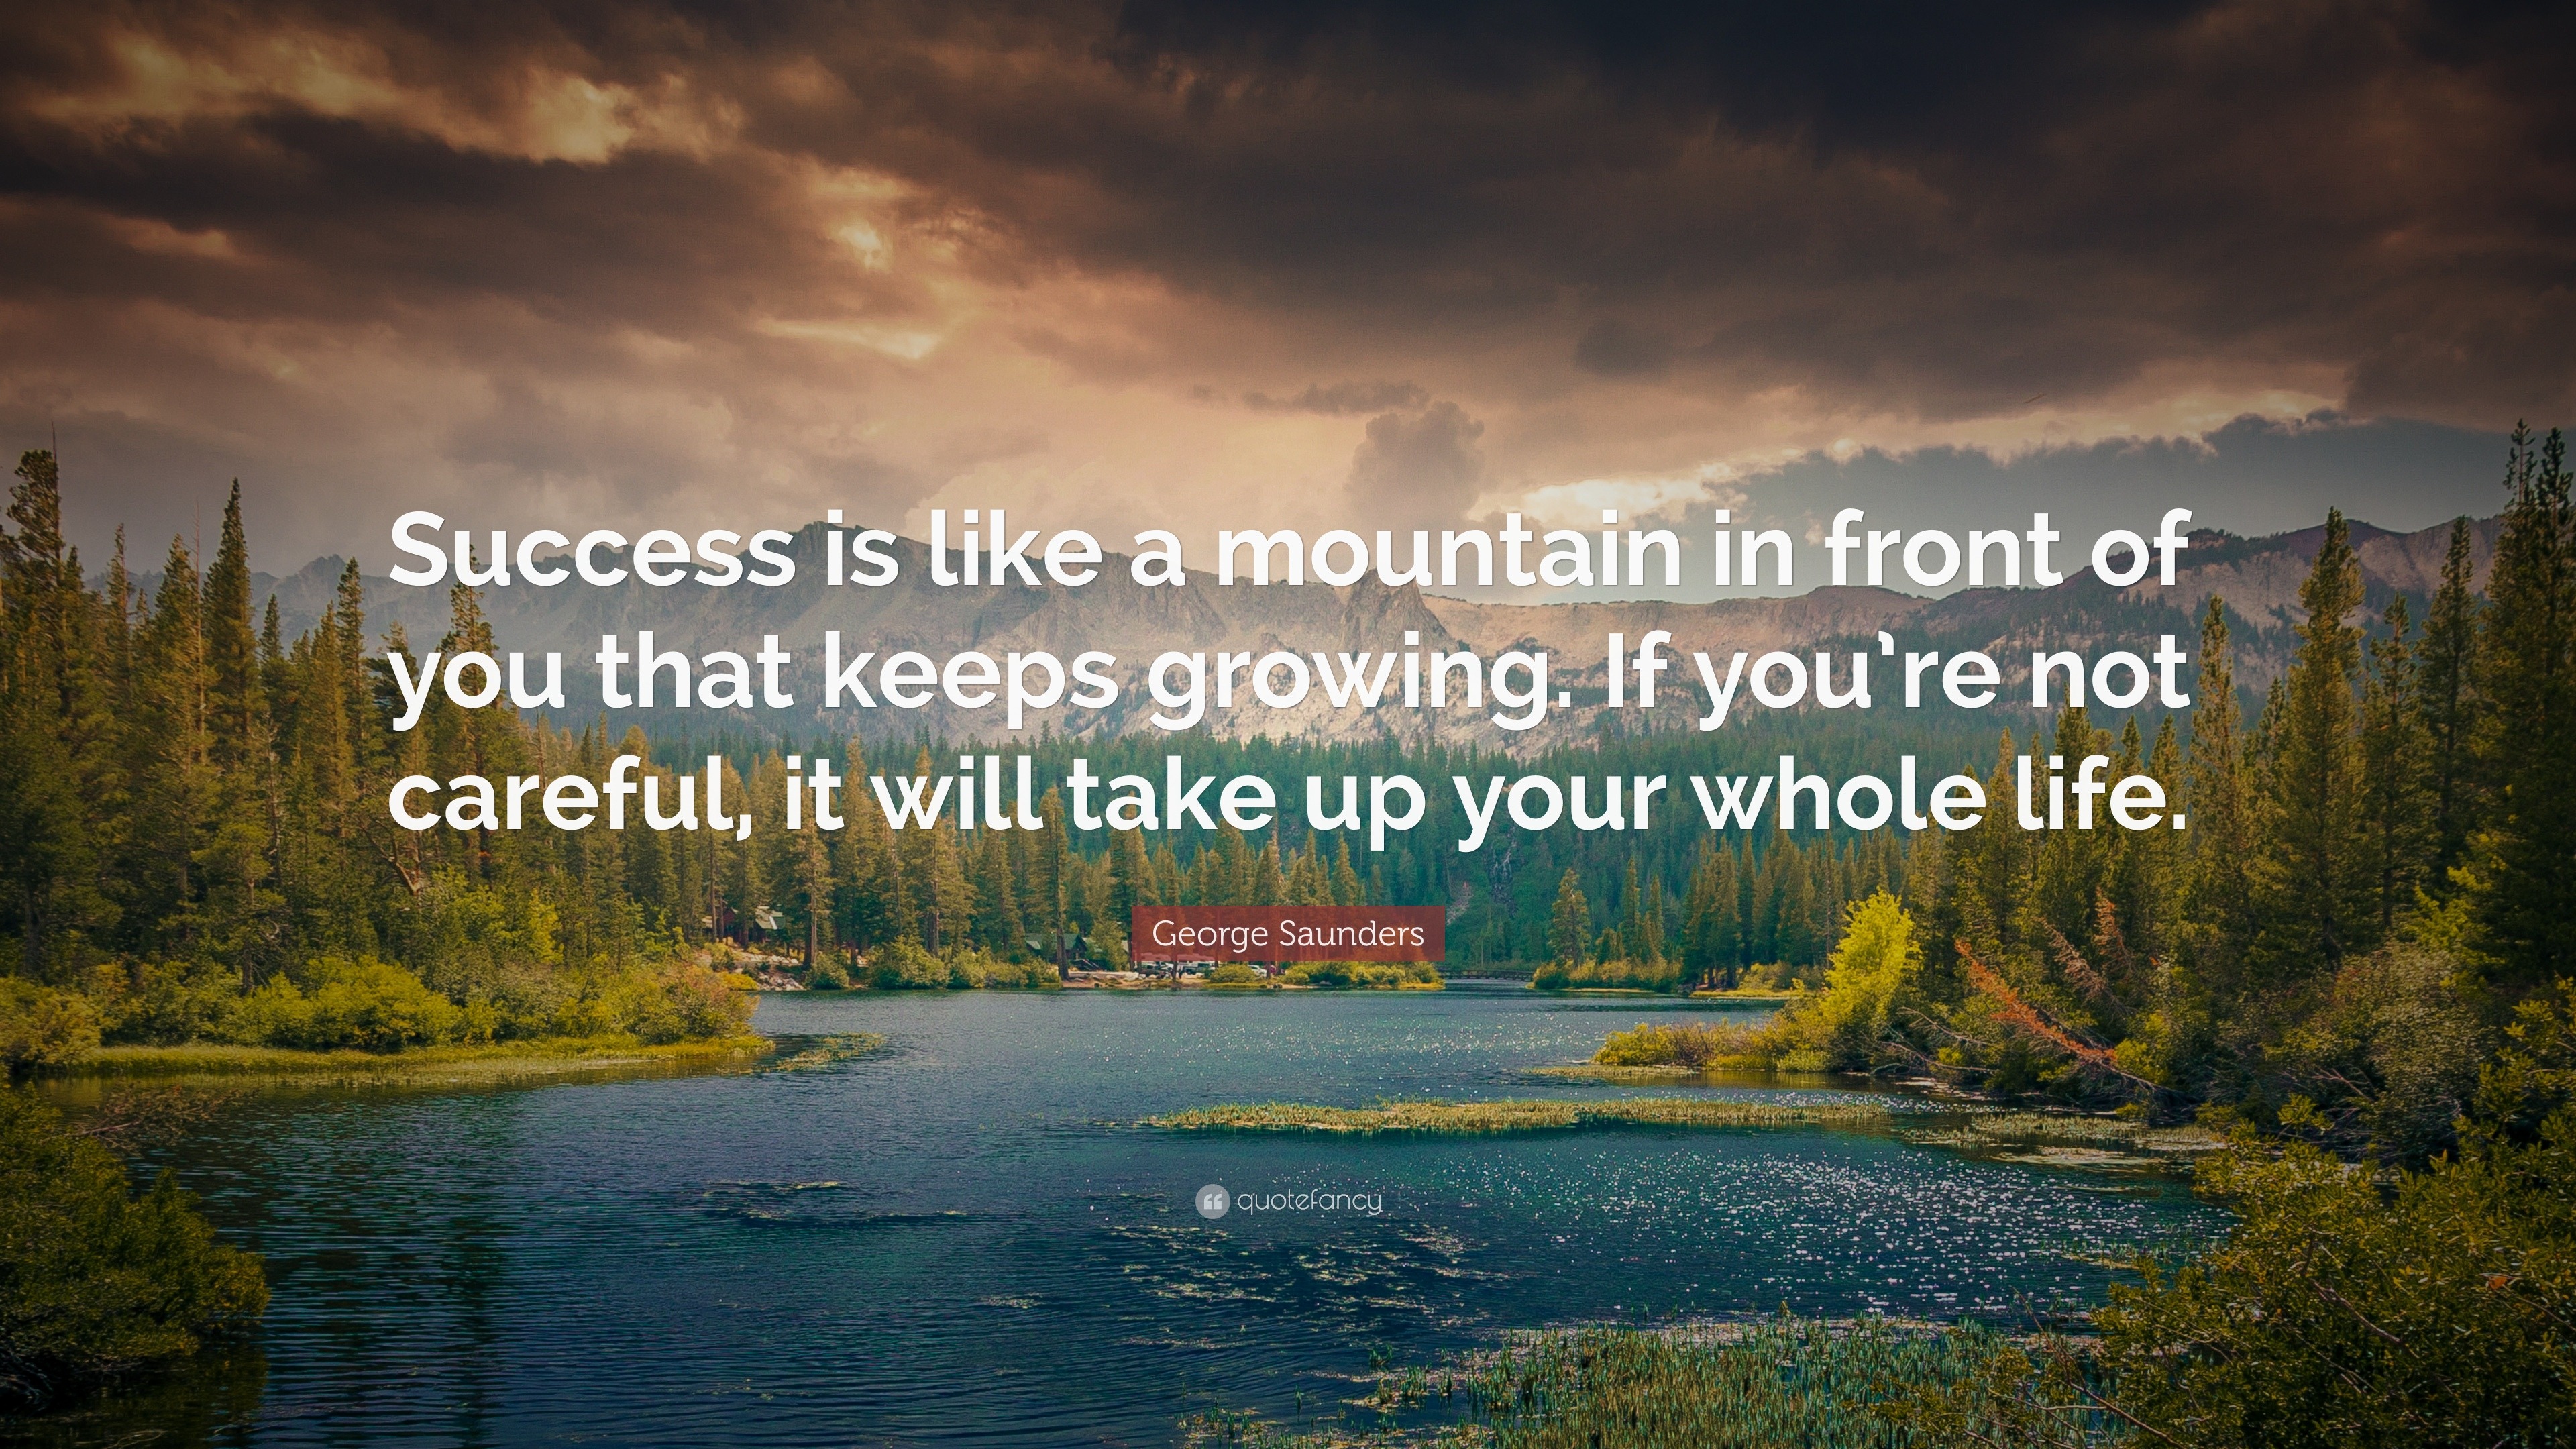 George Saunders Quote: “Success is like a mountain in front of you that